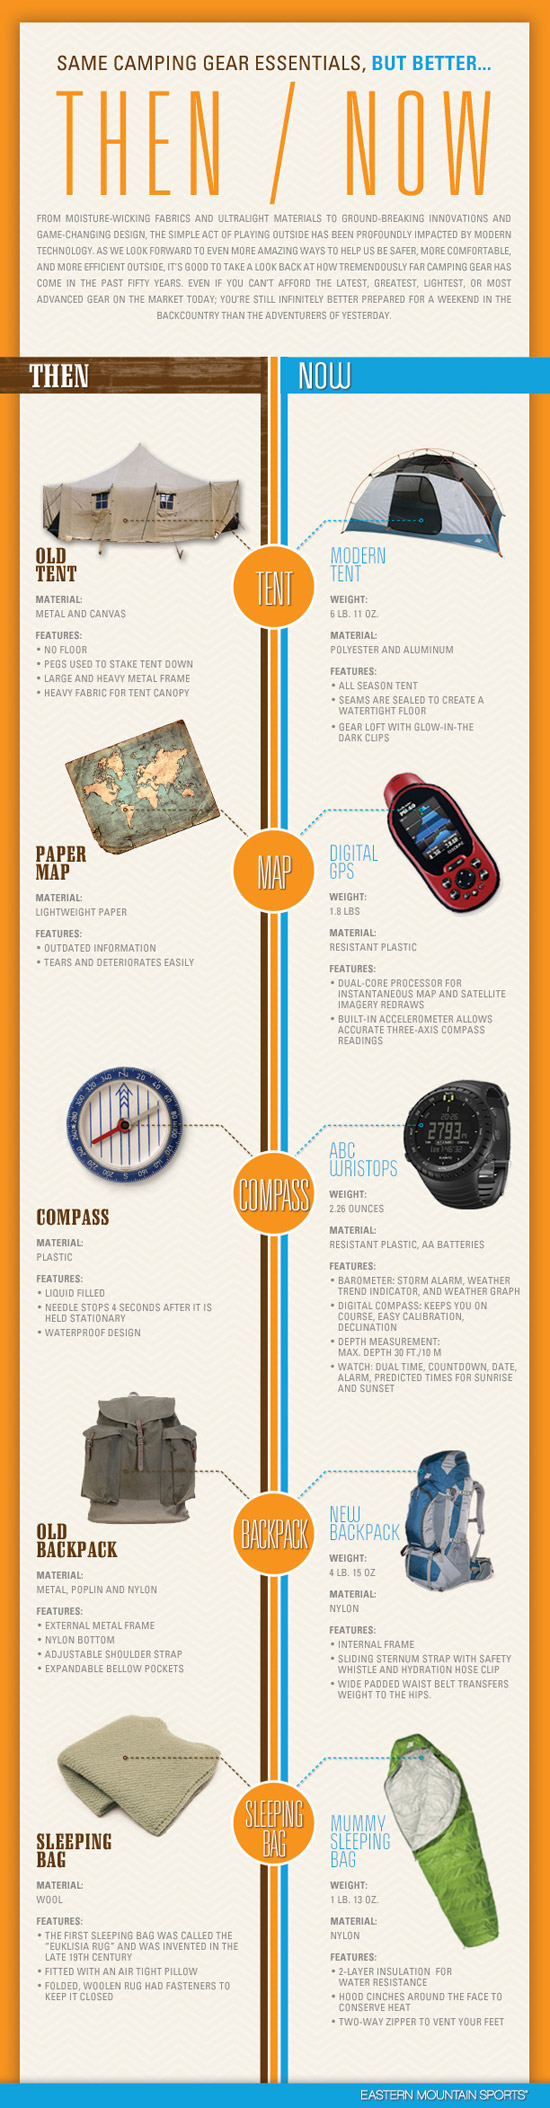 Then and Now Camping Gear Infographic